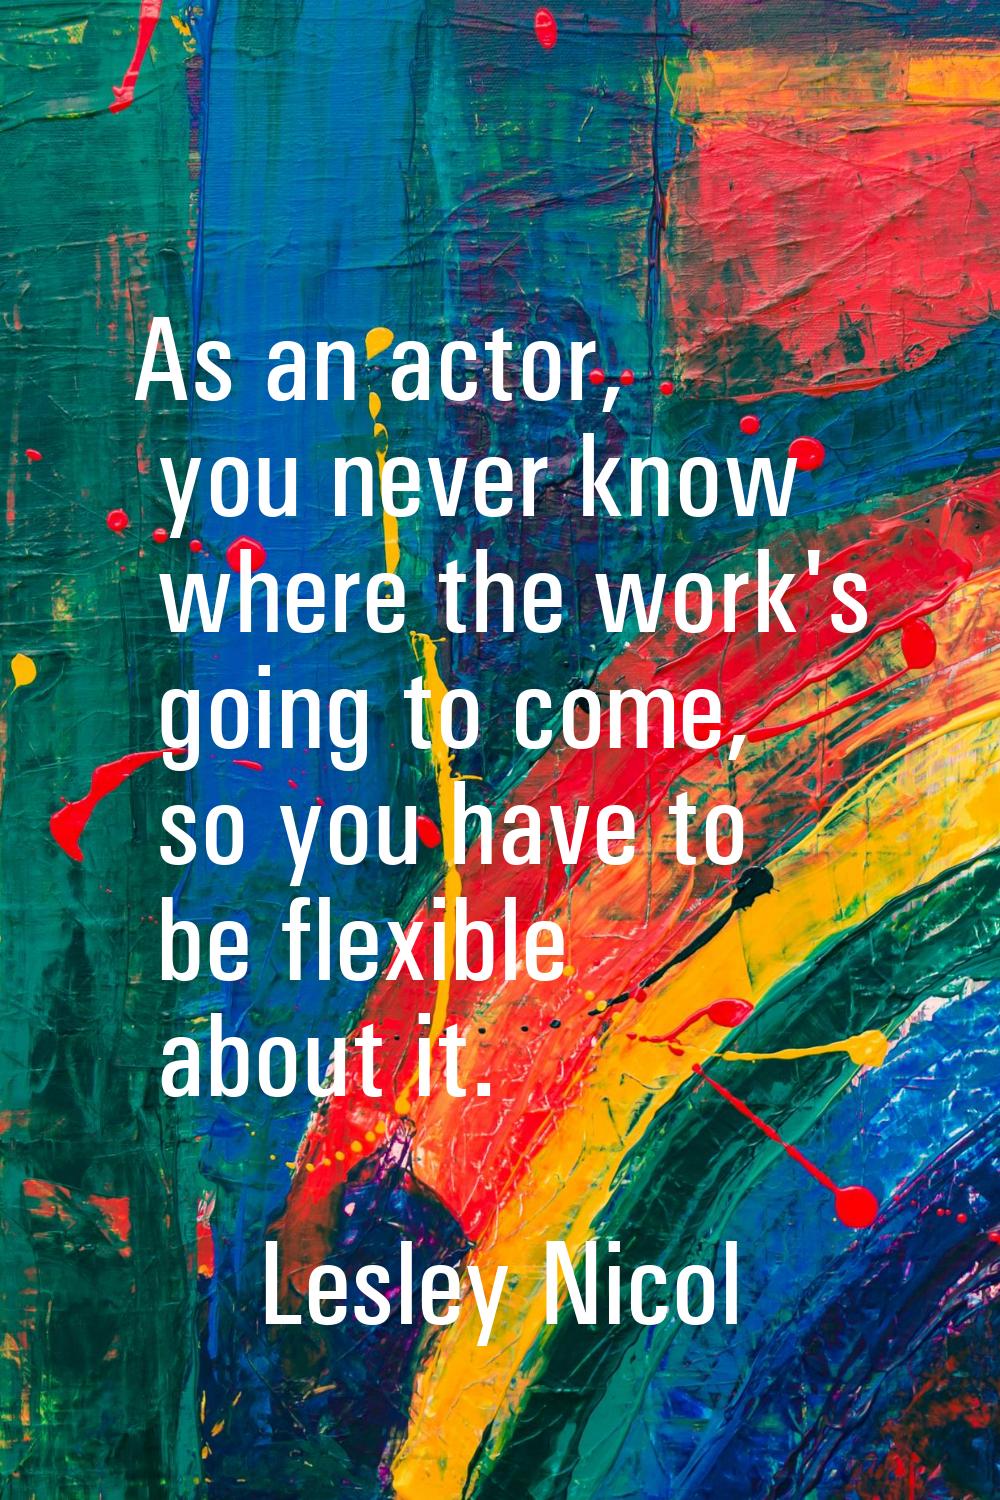 As an actor, you never know where the work's going to come, so you have to be flexible about it.